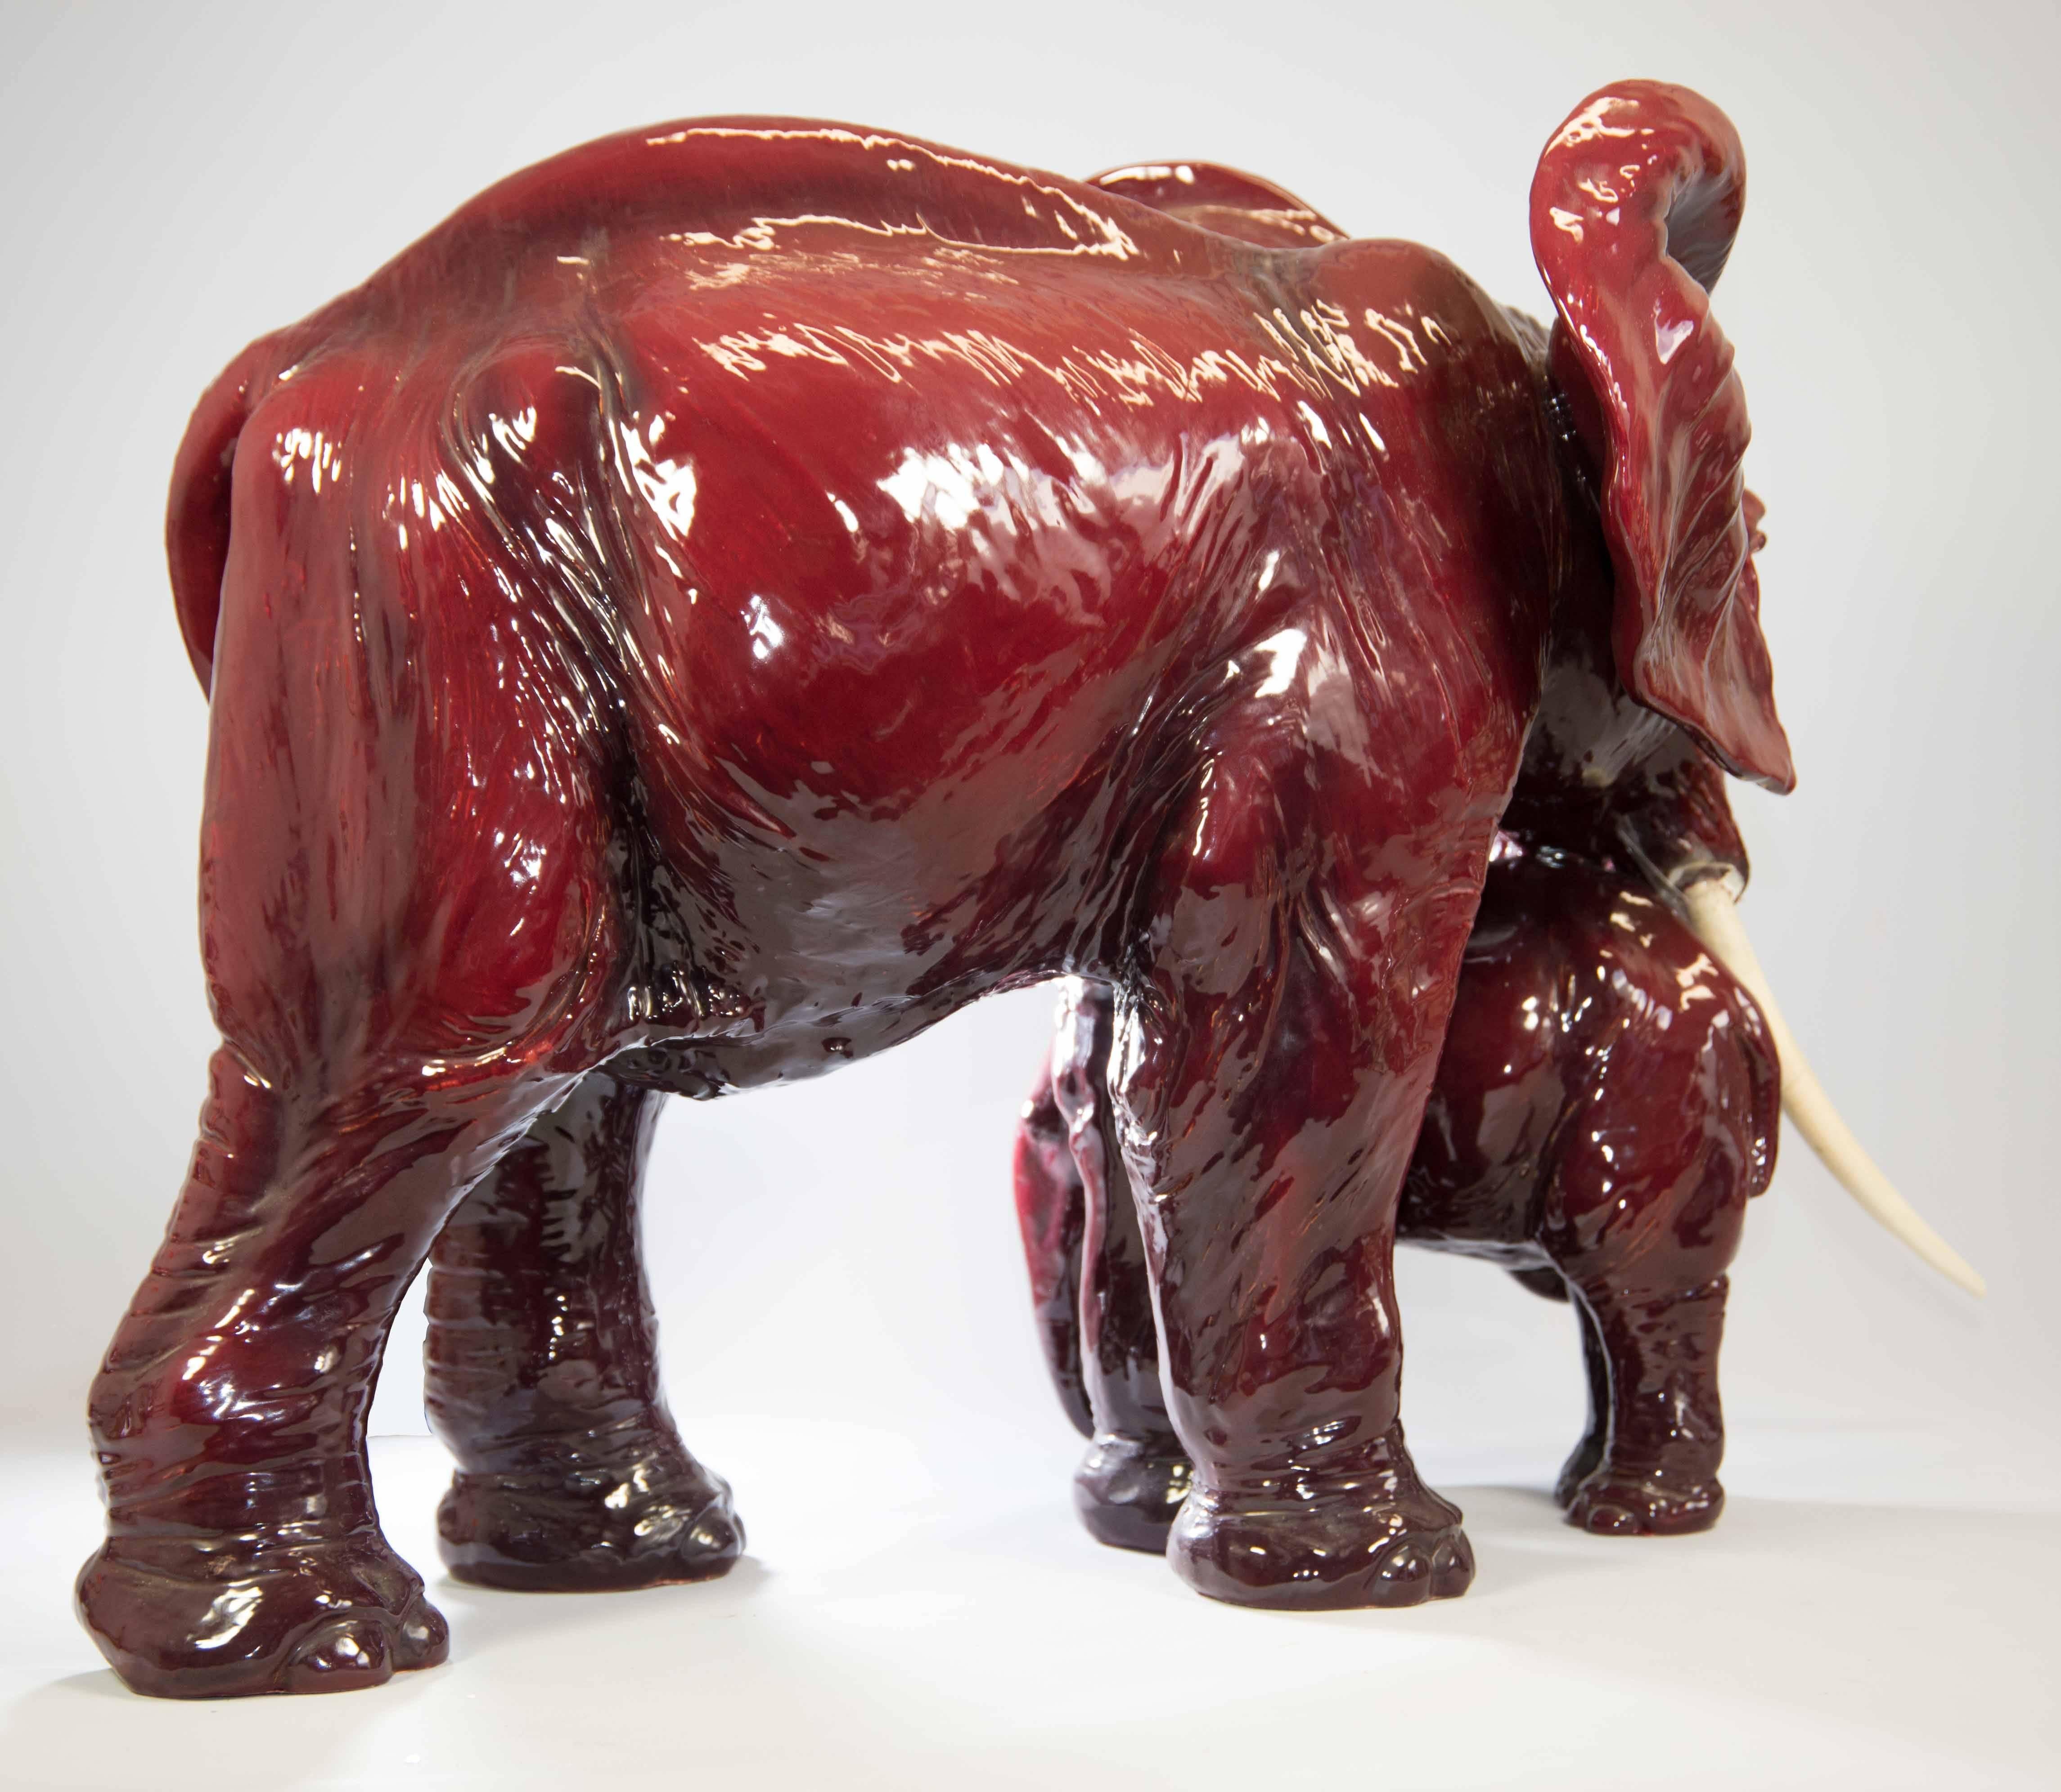 Large red porcelain elephant made by Guido Cacciapuoti, signed on belly.
One of tusks has been broken, not real ivory but a composite material, and should be repaired. The damage is close to the root of the tooth, a repair can be done invisibly.